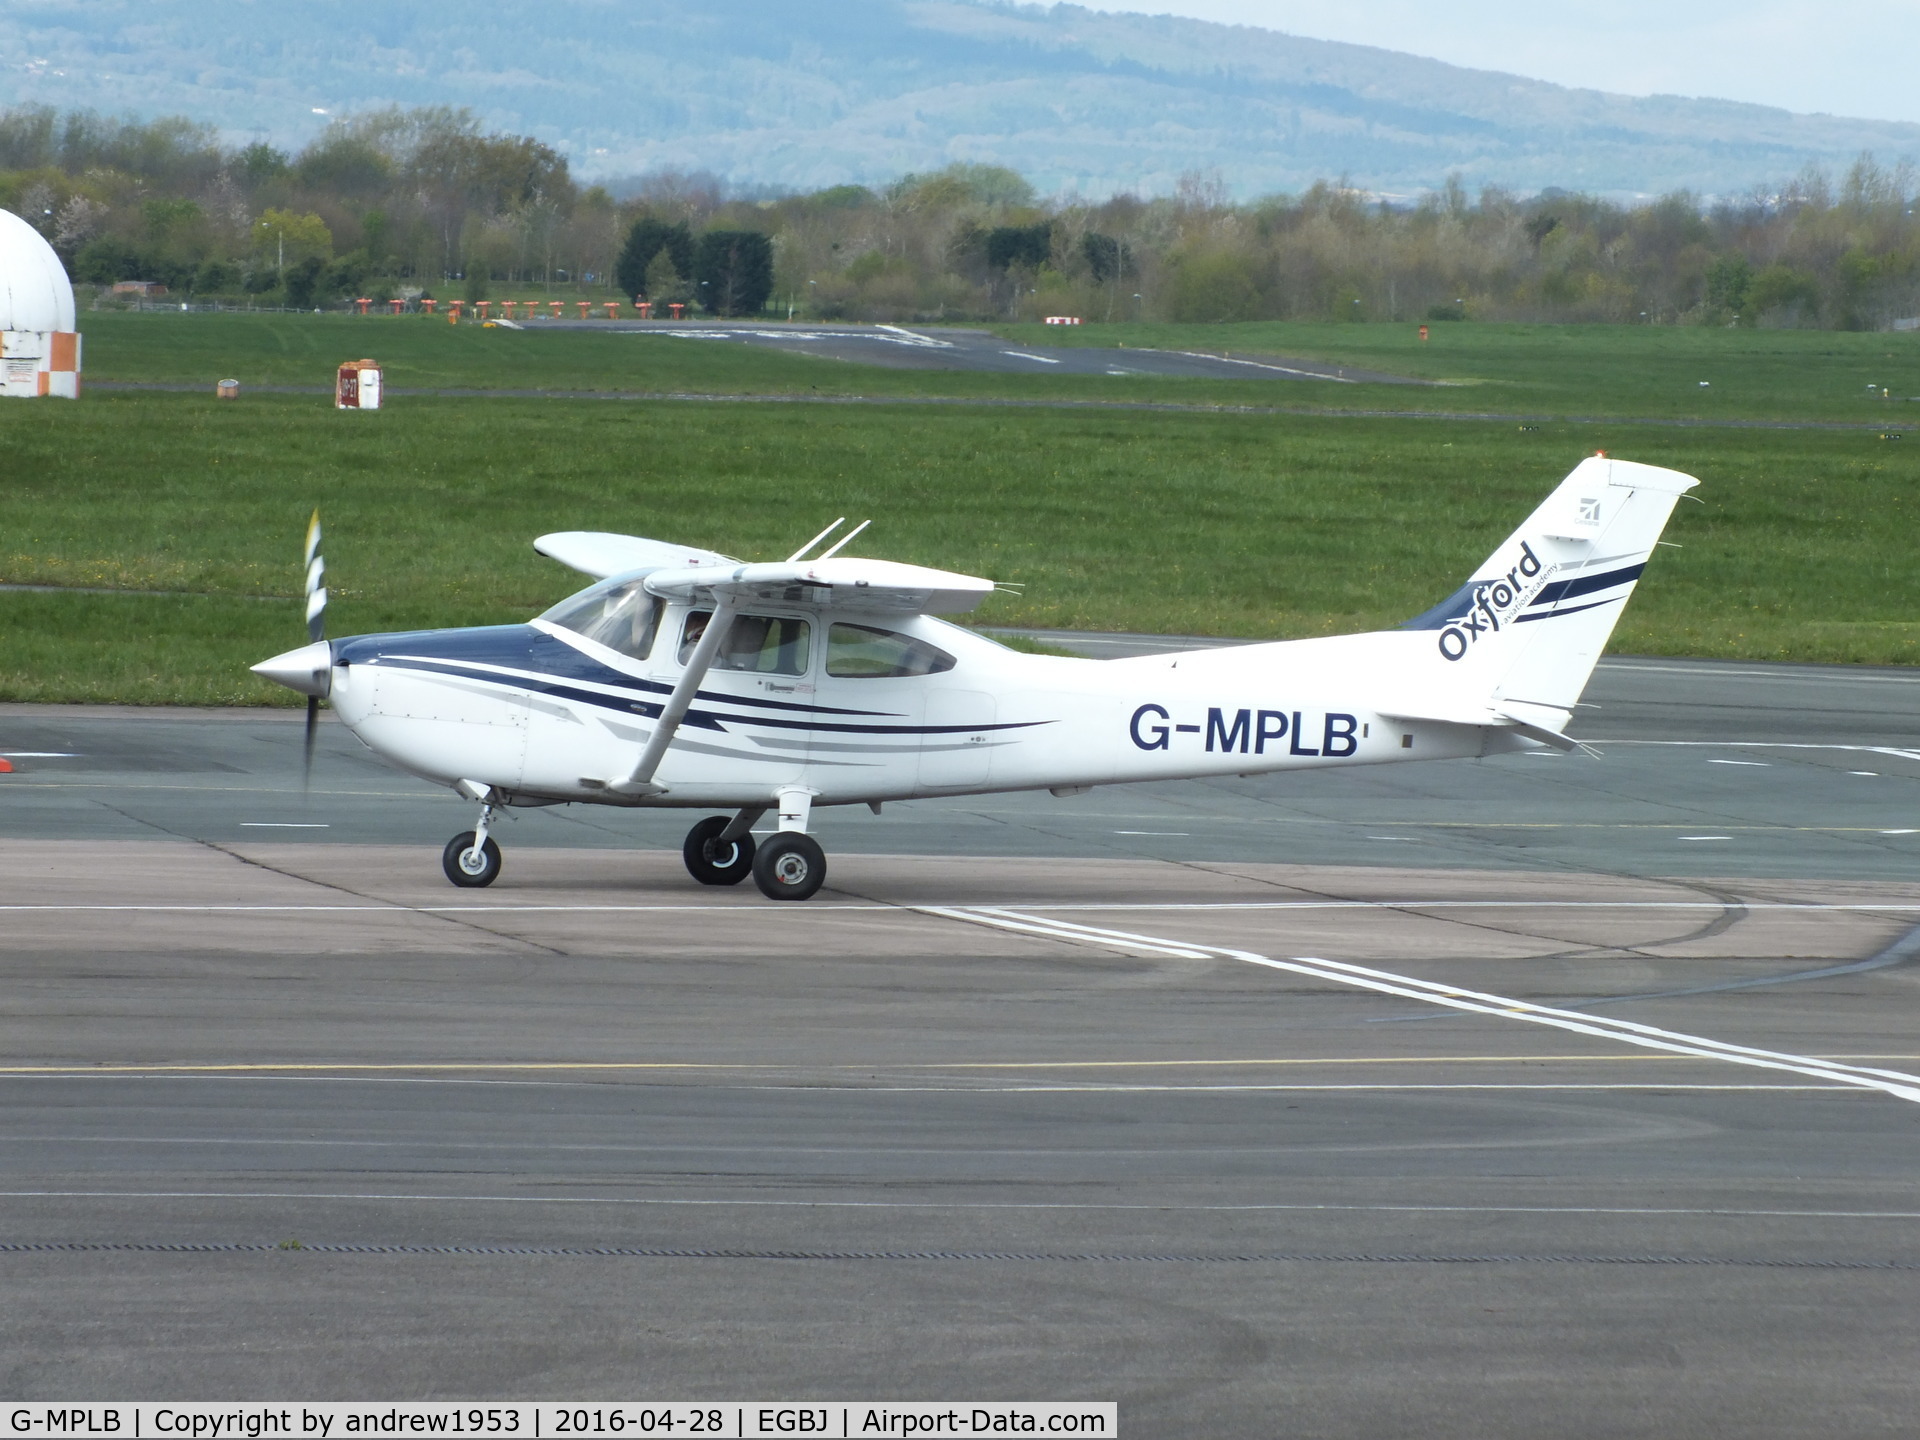 G-MPLB, 2005 Cessna 182T Skylane C/N 18281646, G-MPLB at Gloucestershire Airport.